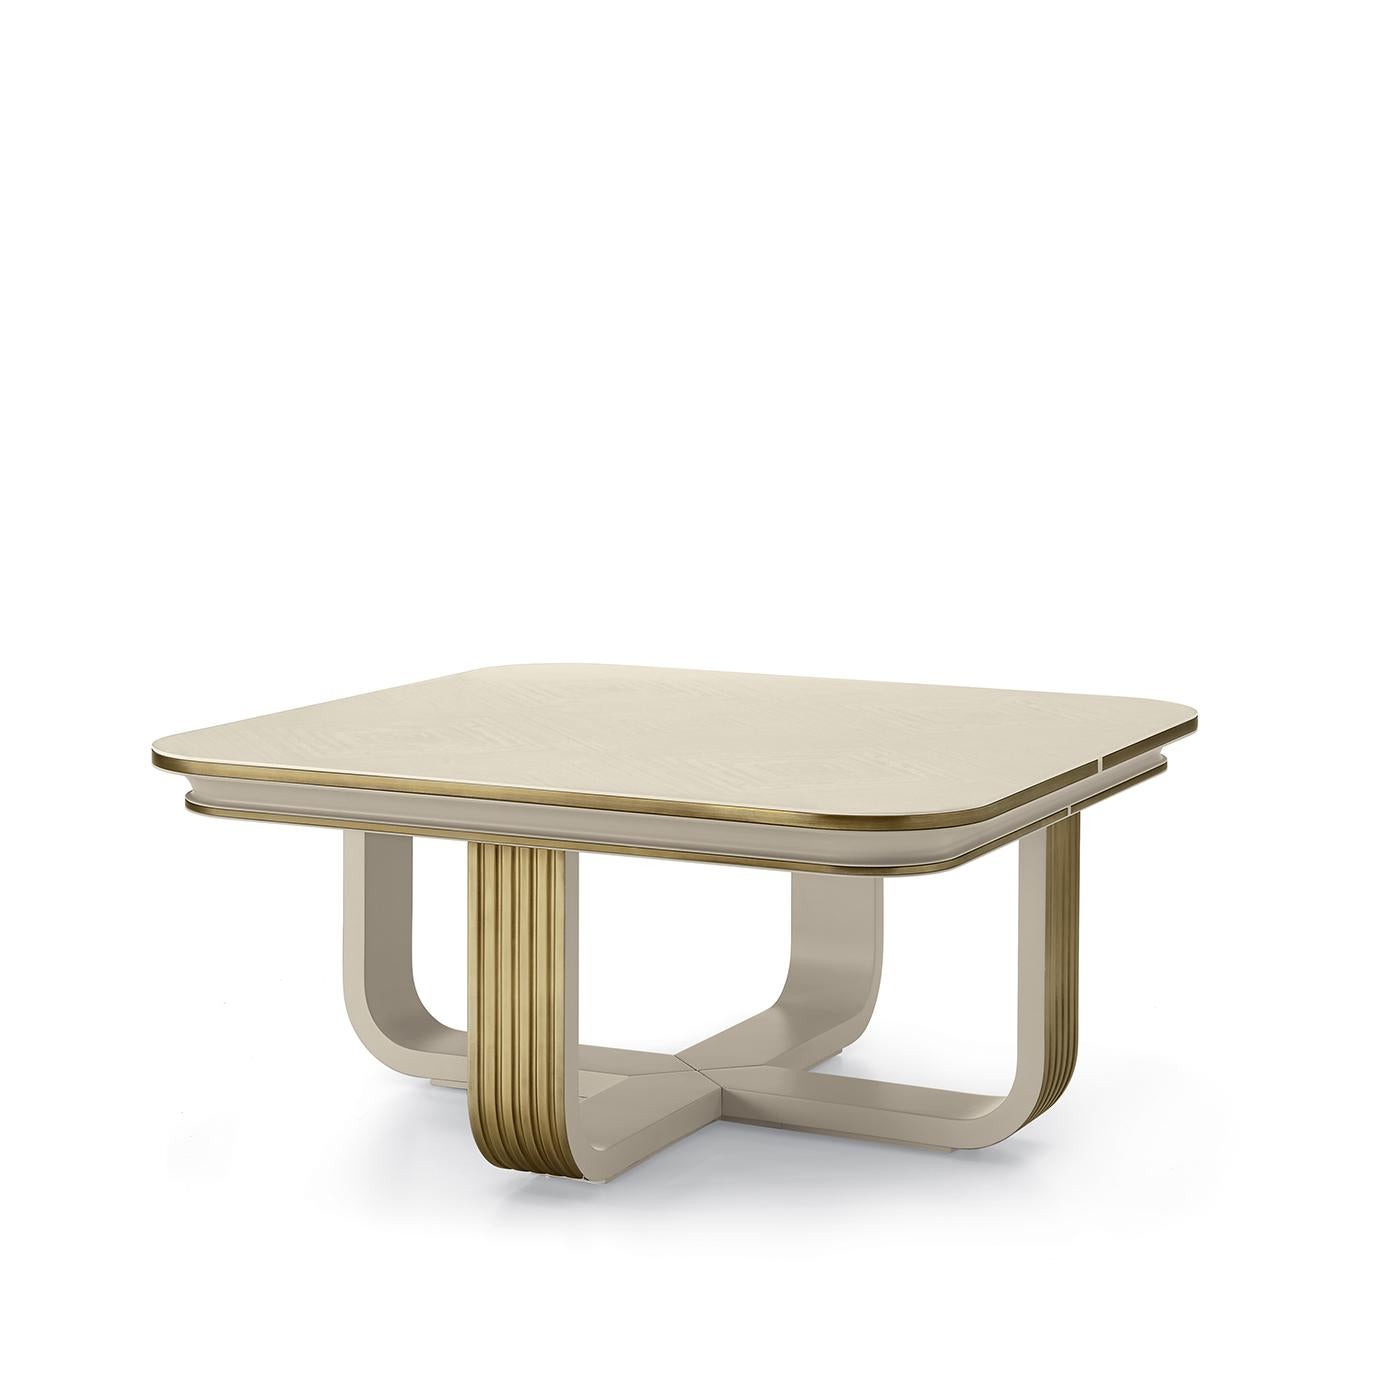 This coffee table exudes refined sophistication in its sinuous and sleek silhouette enhanced by an elegant combination of white and gold. Crafted of white eucalyptus-veneered MDF, the rectangular top is supported by the superbly curved profile of